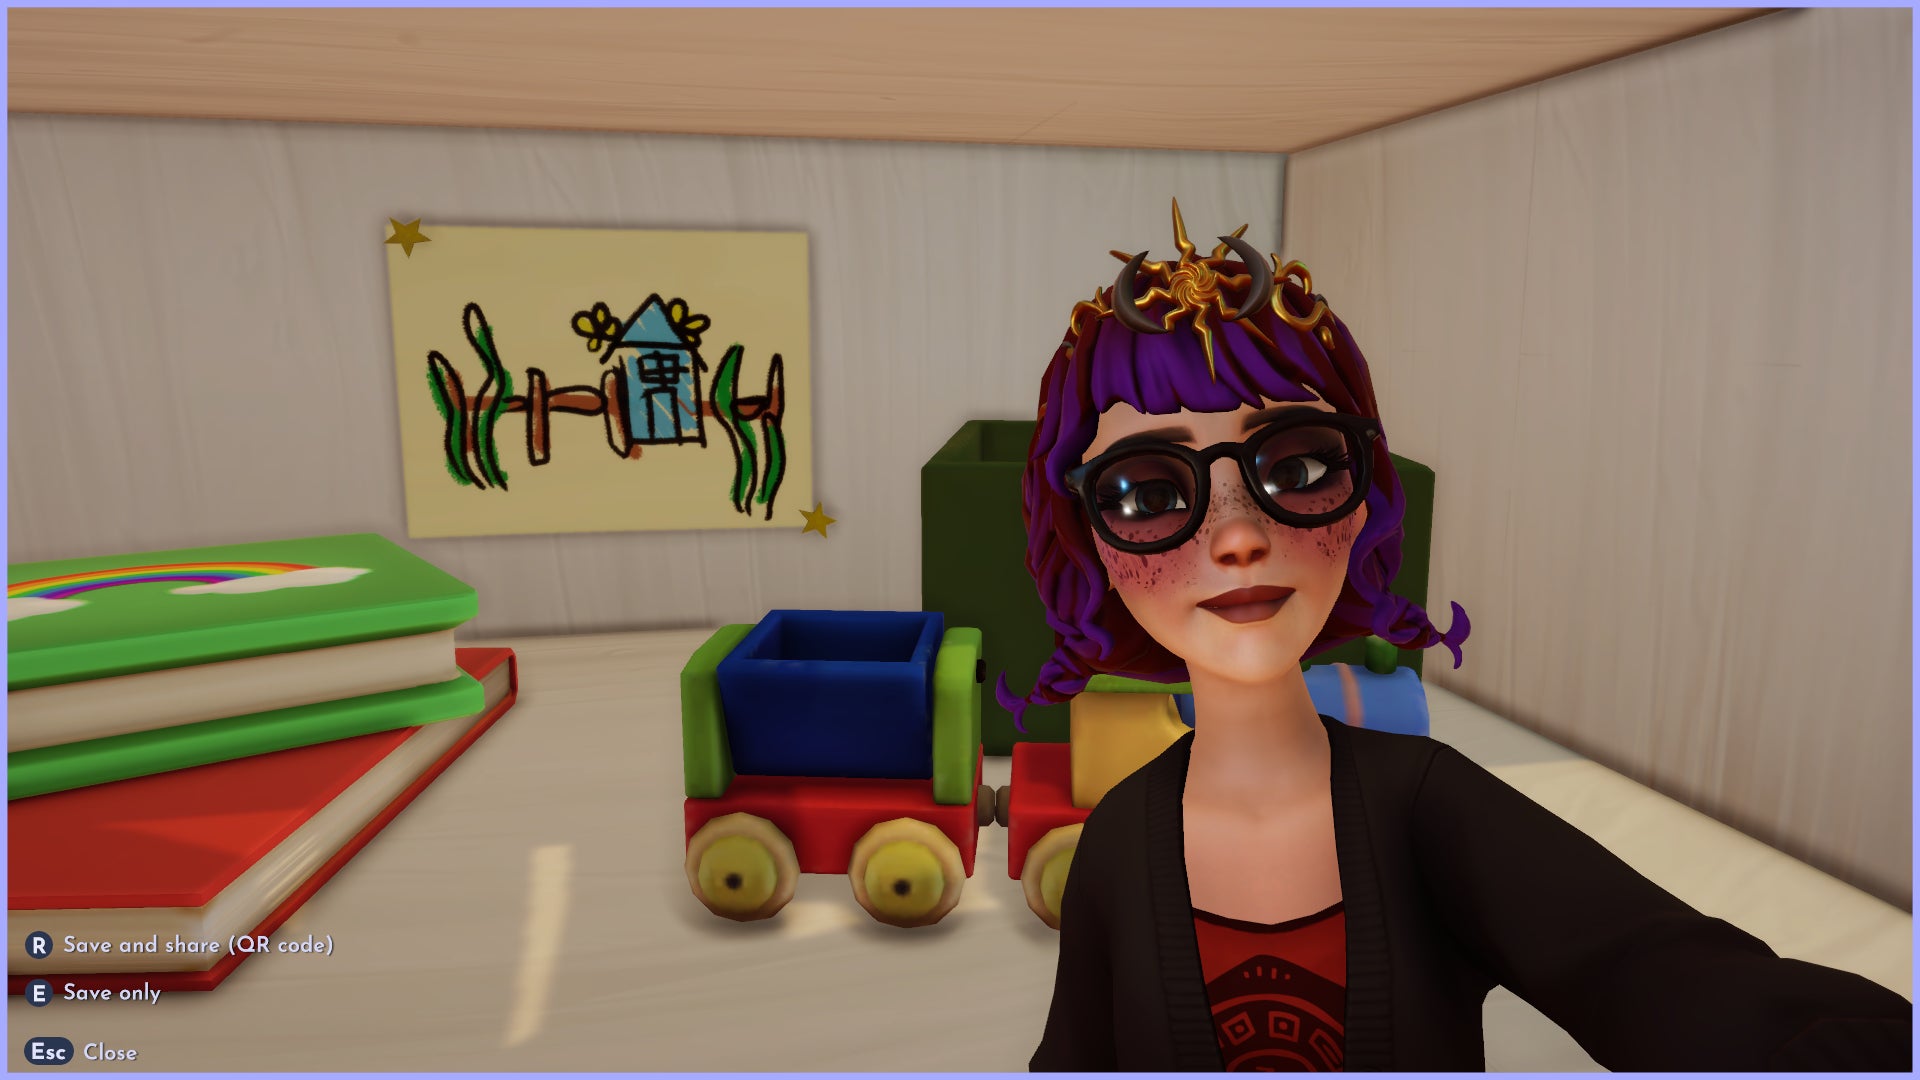 The player character is photographed next to one of Bonnie's drawings in Disney Dreamlight Valley's Toy Story realm